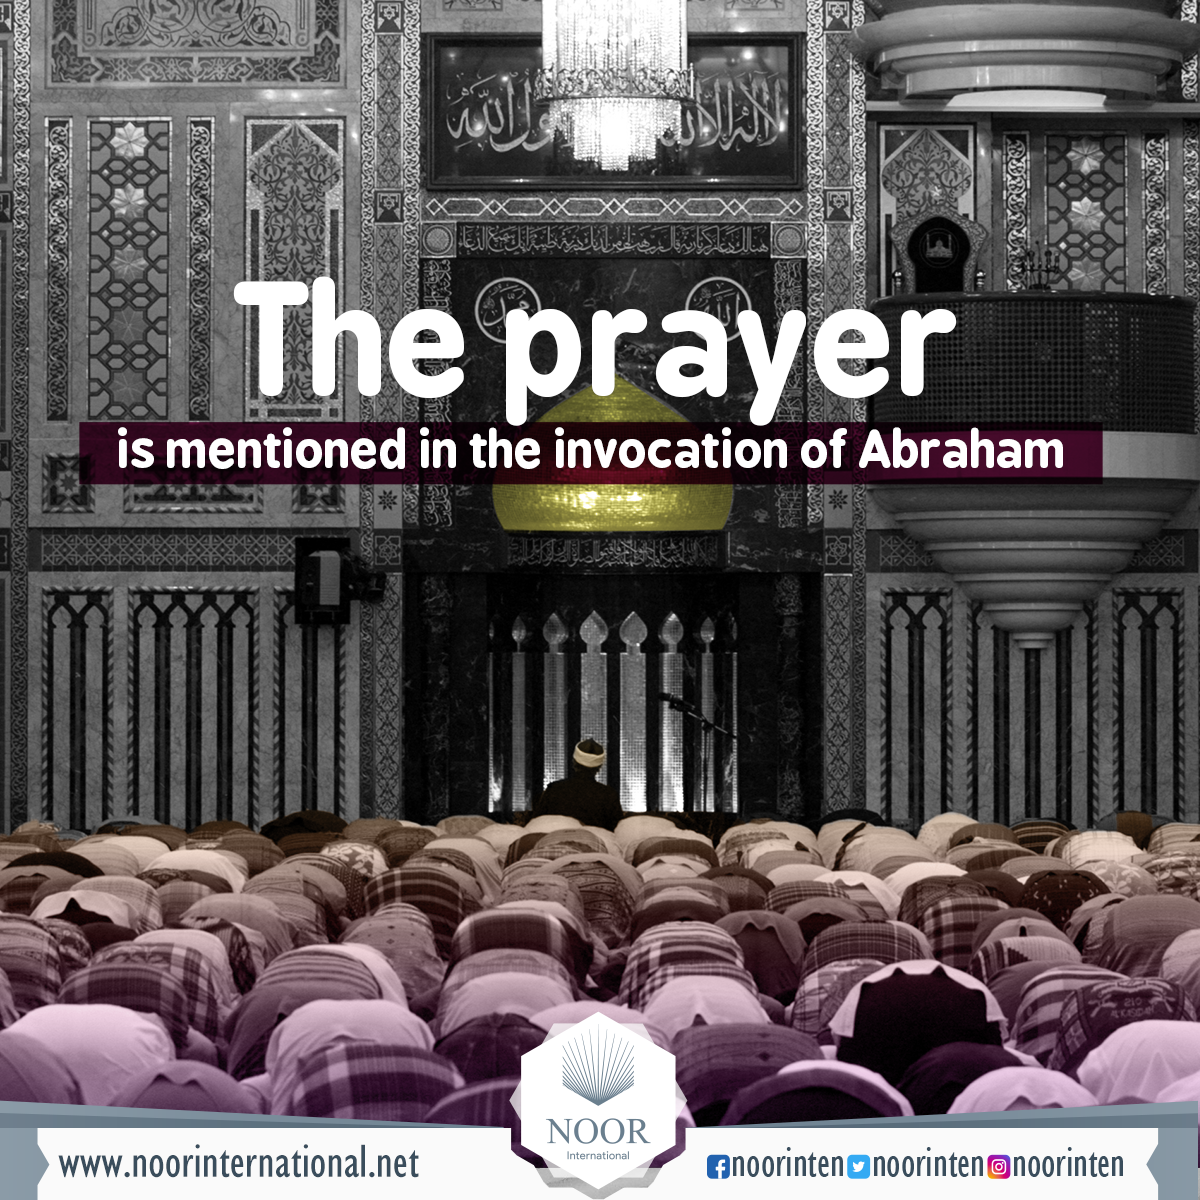 The prayer is mentioned in the  invocation of Abraham